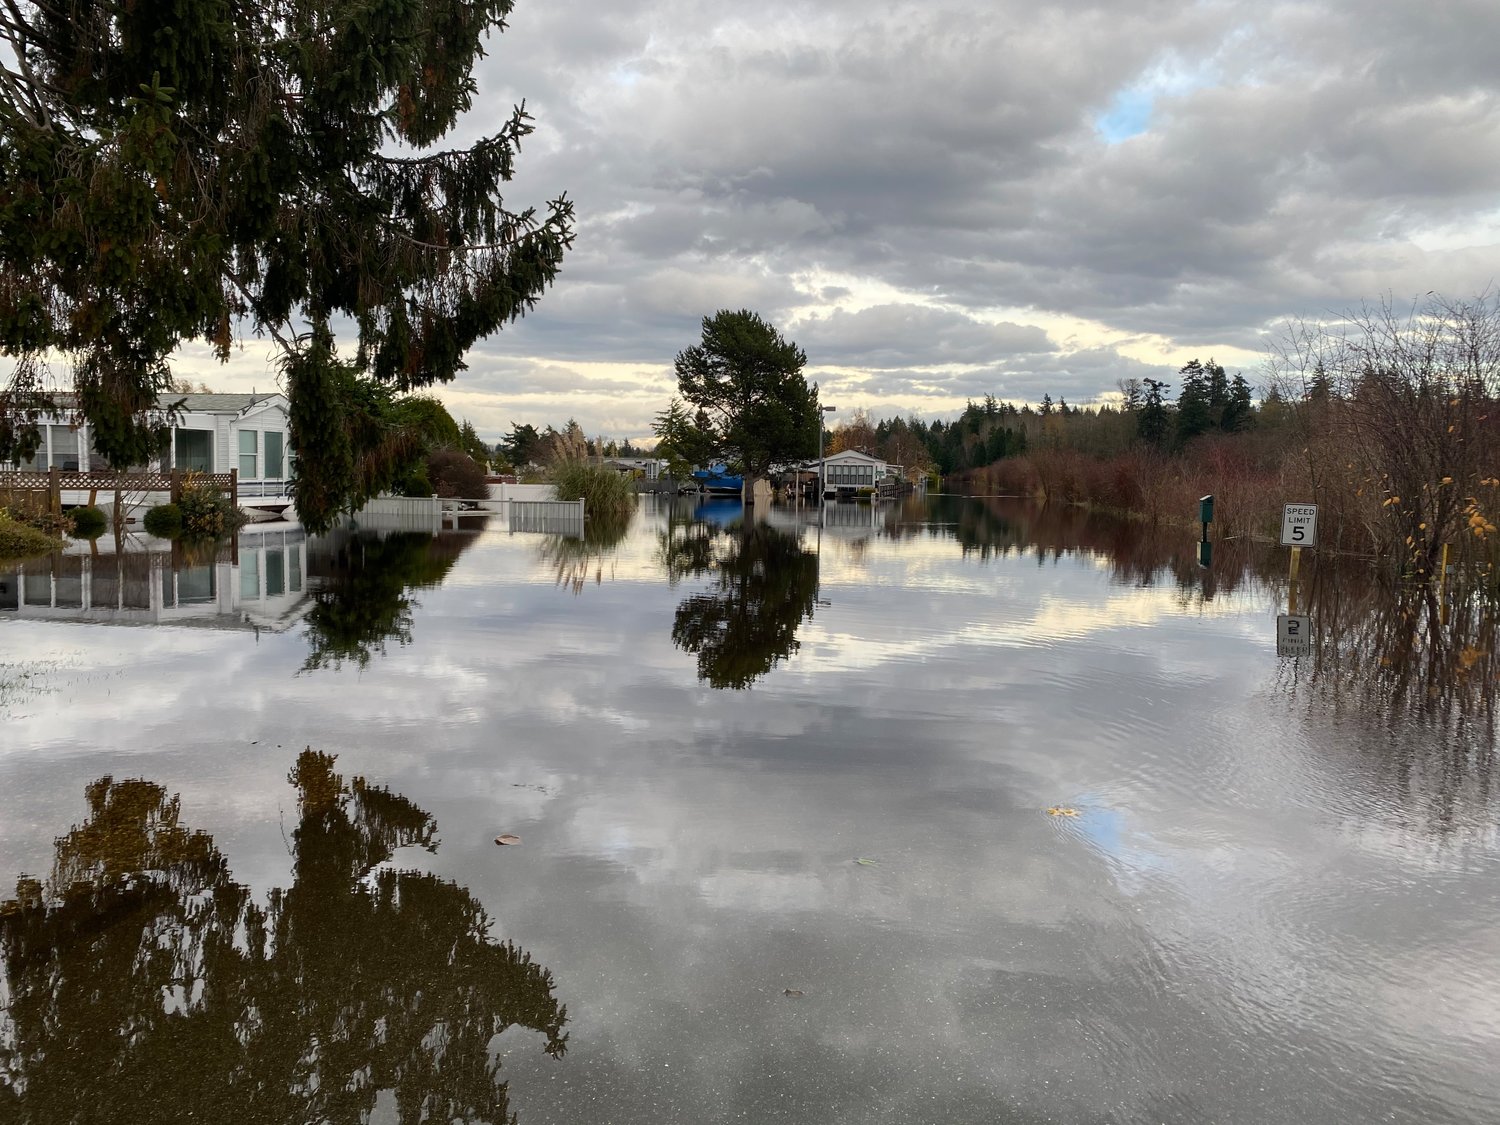 Birch Bay Leisure Park began flooding for a second time November 28, with waters reaching up to 2.5 feet. Photograph taken November 29.